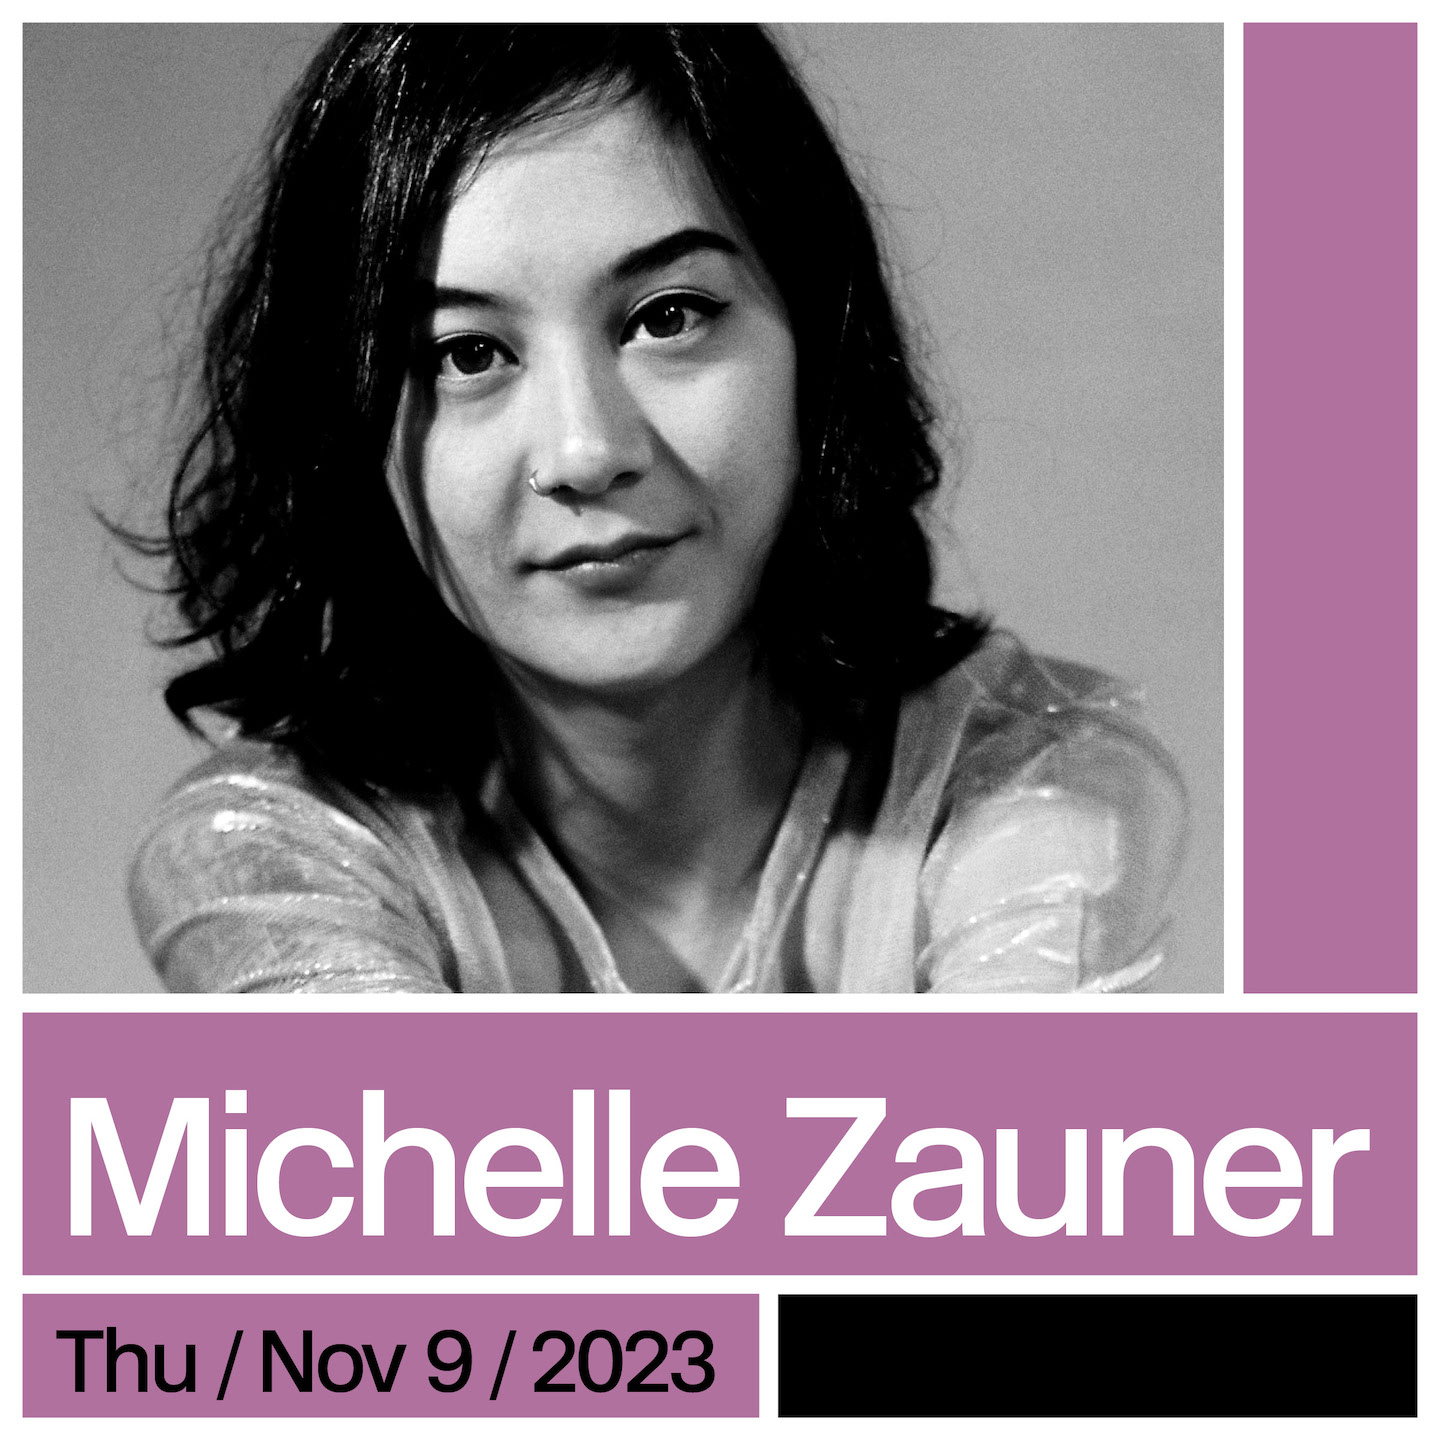 Michelle Zauner image provided by Just Buffalo Literary Center